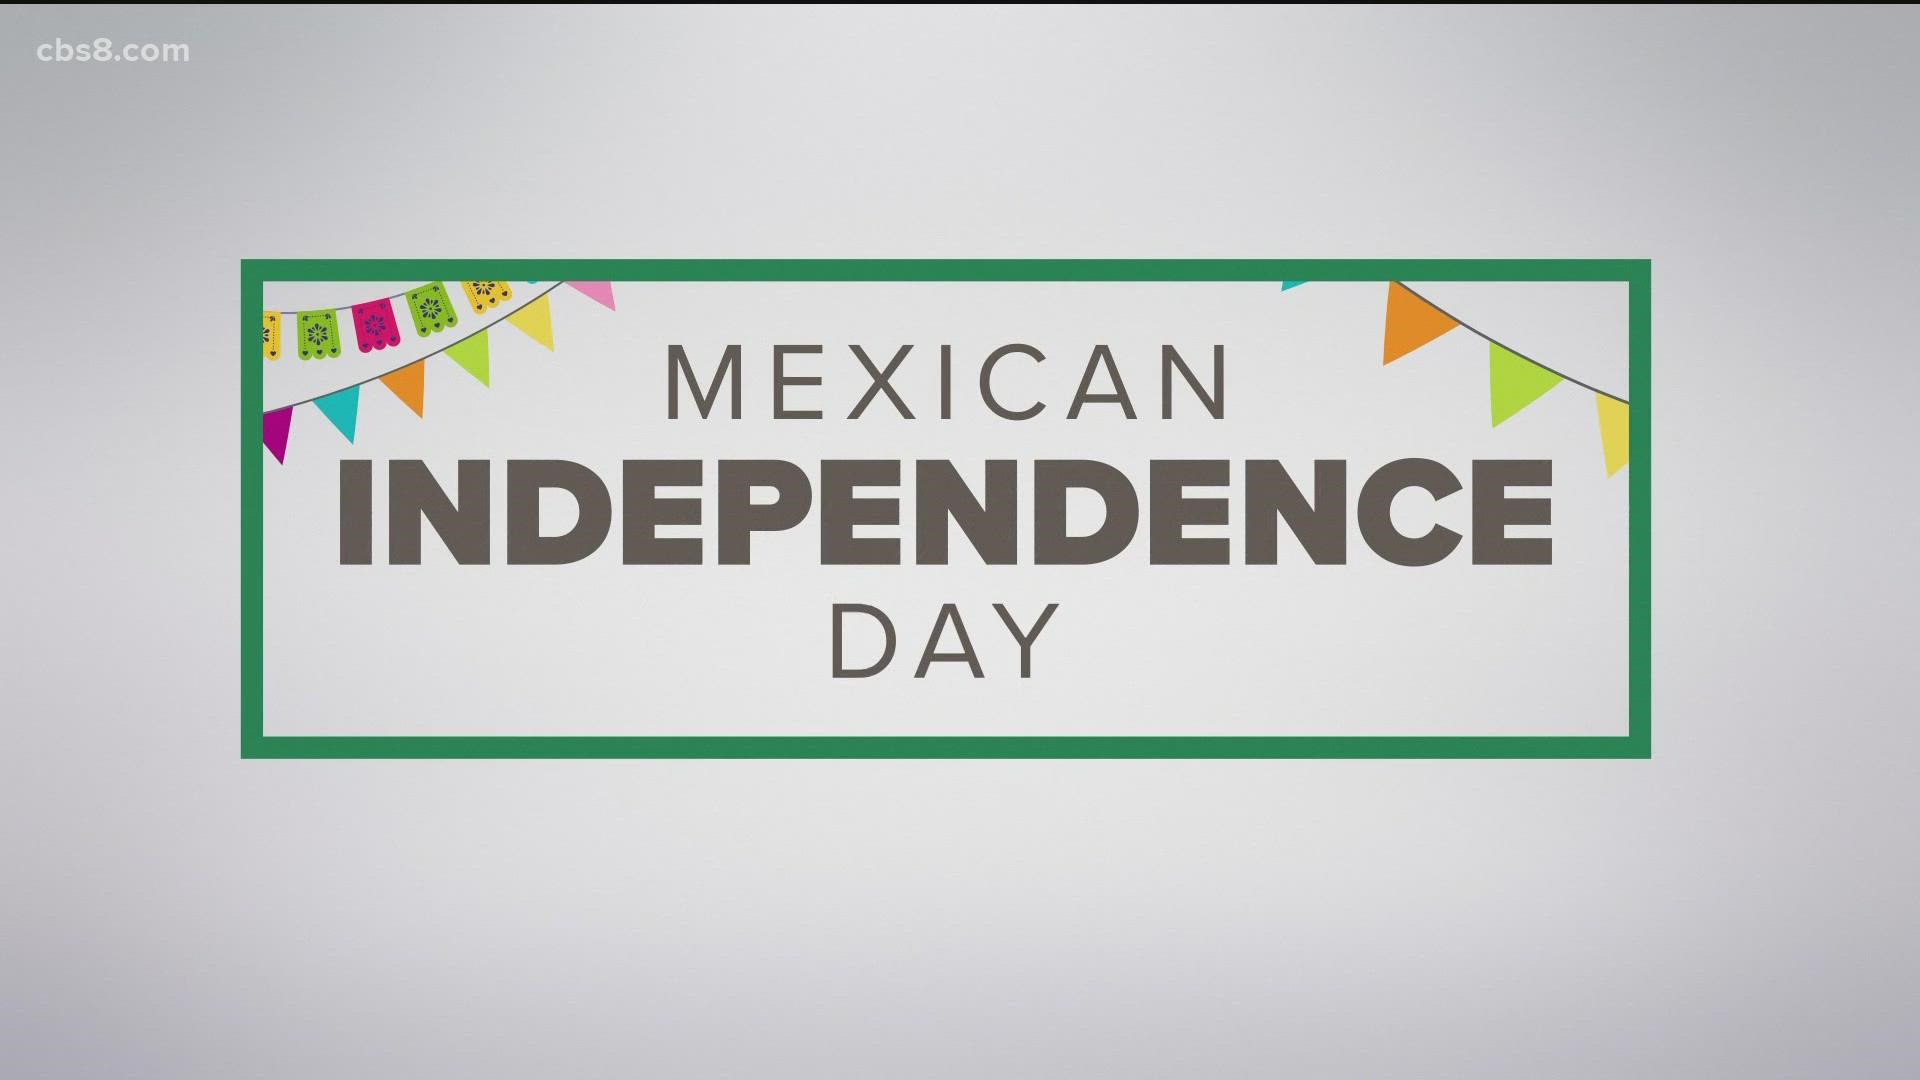 The Mexican Independence Day is officially recognized on Sept. 16, but the celebrations actually start the night before.